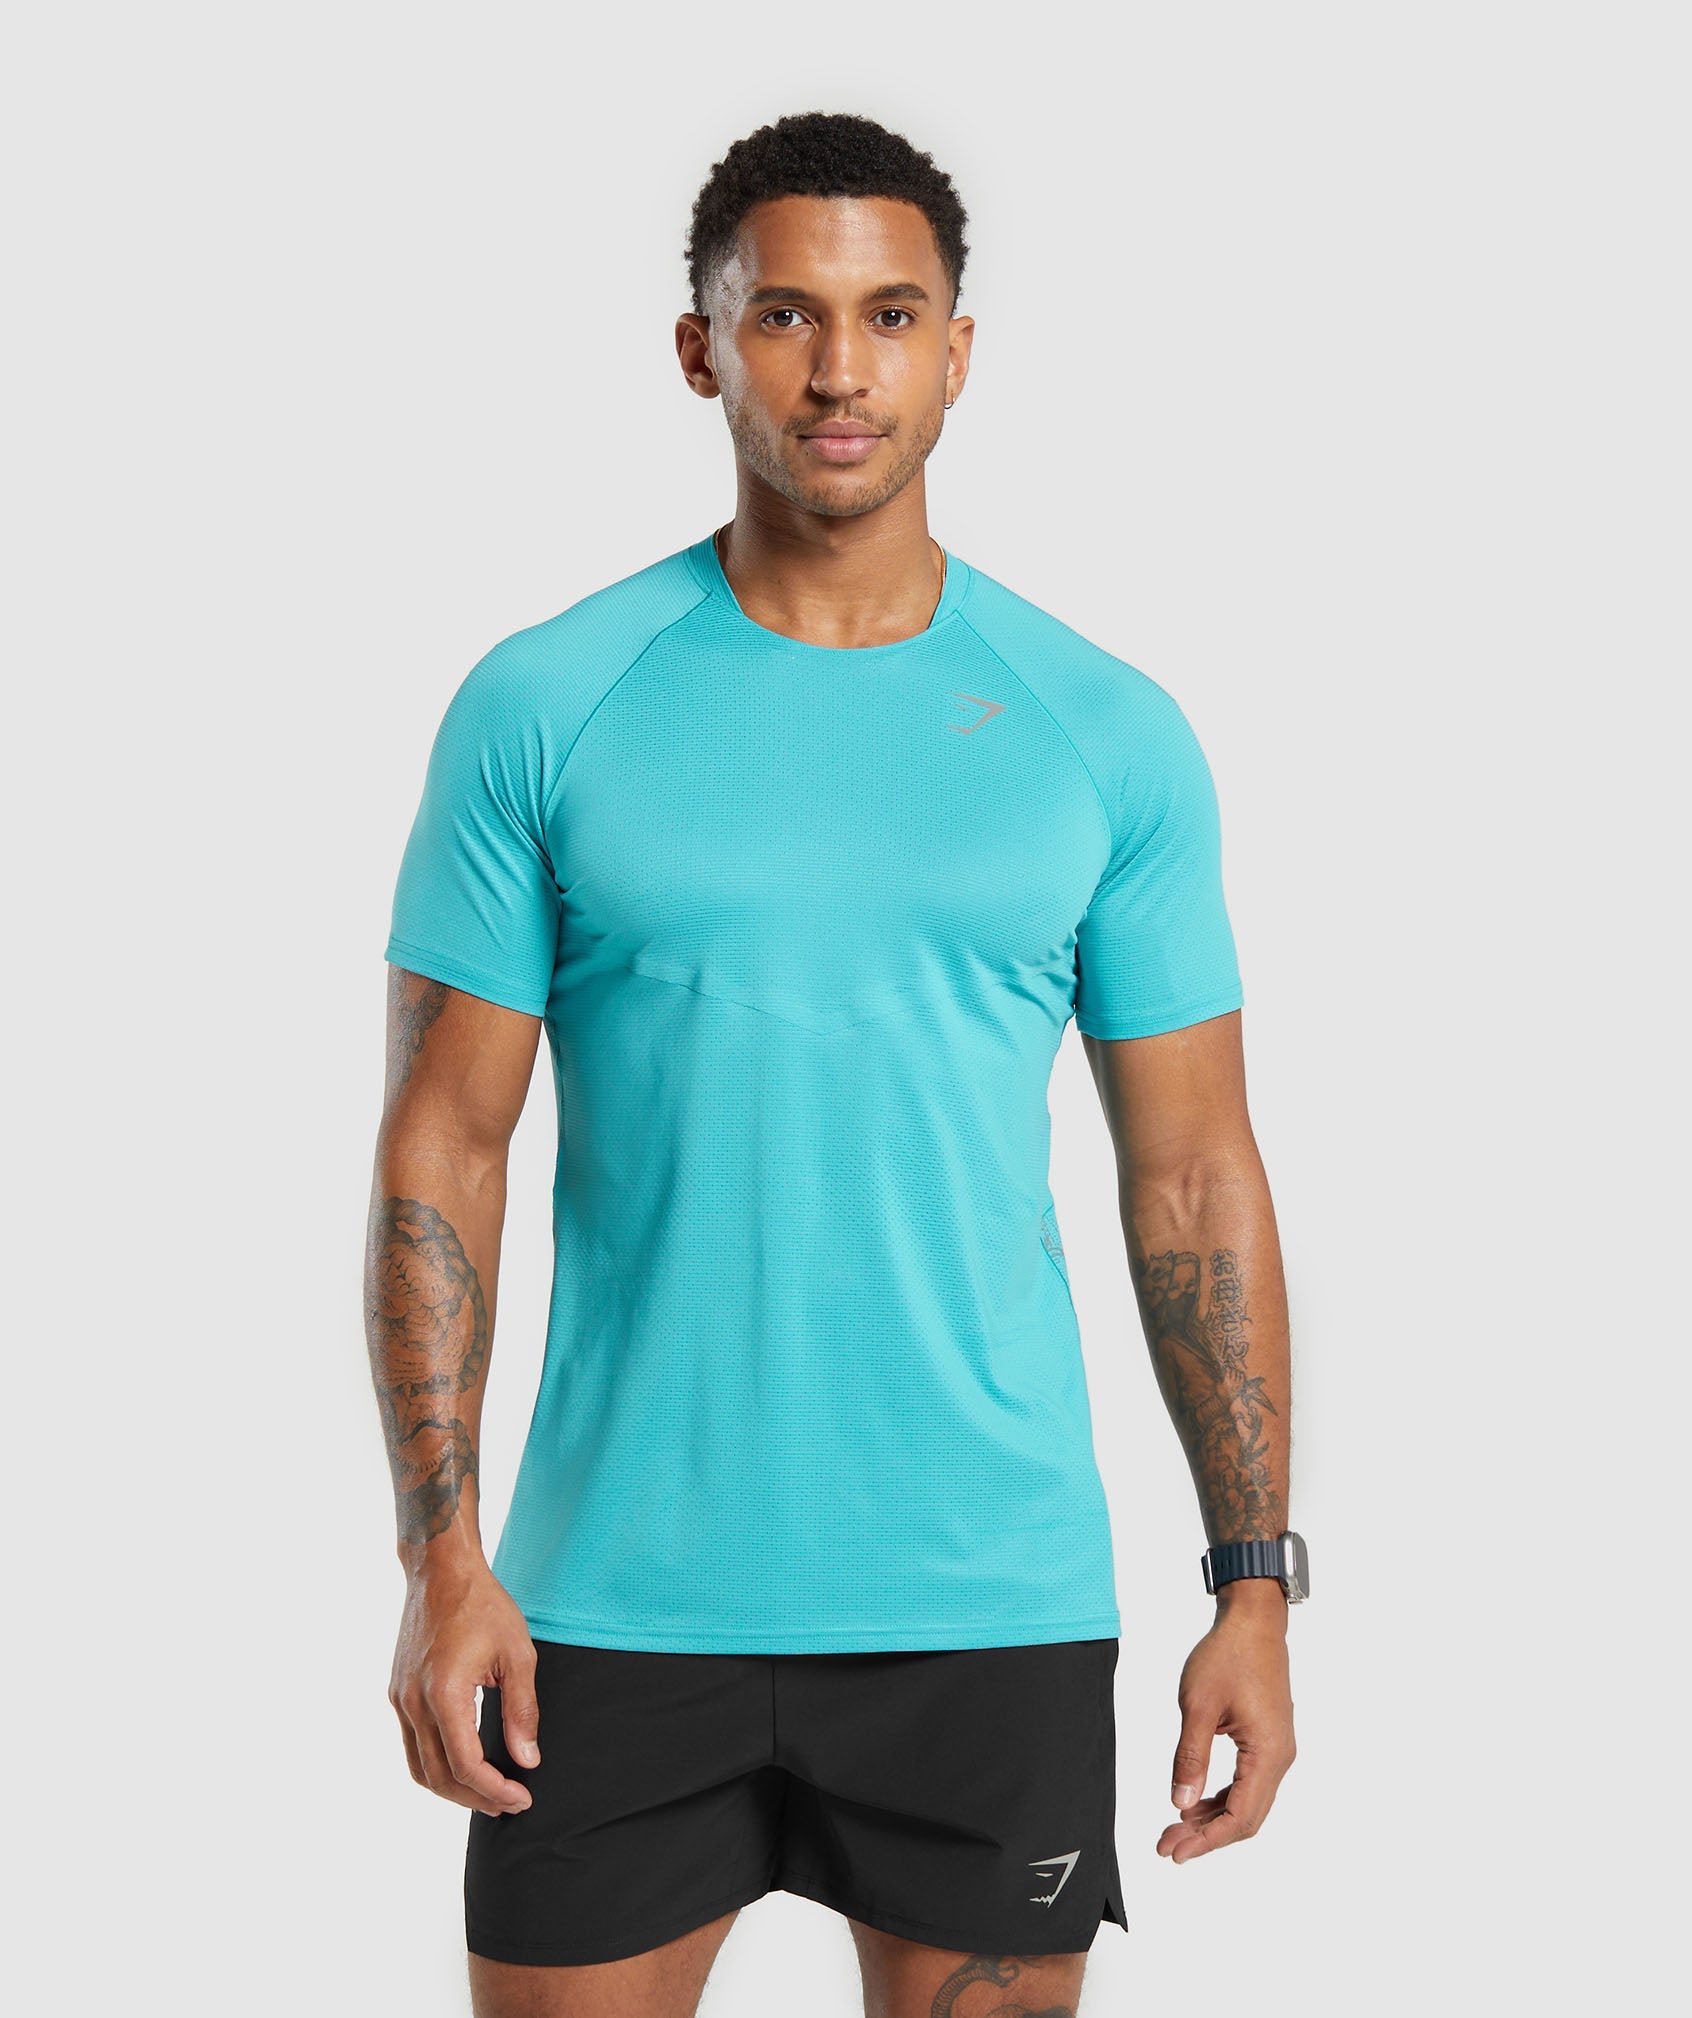 Speed T-Shirt in Artificial Teal - view 1